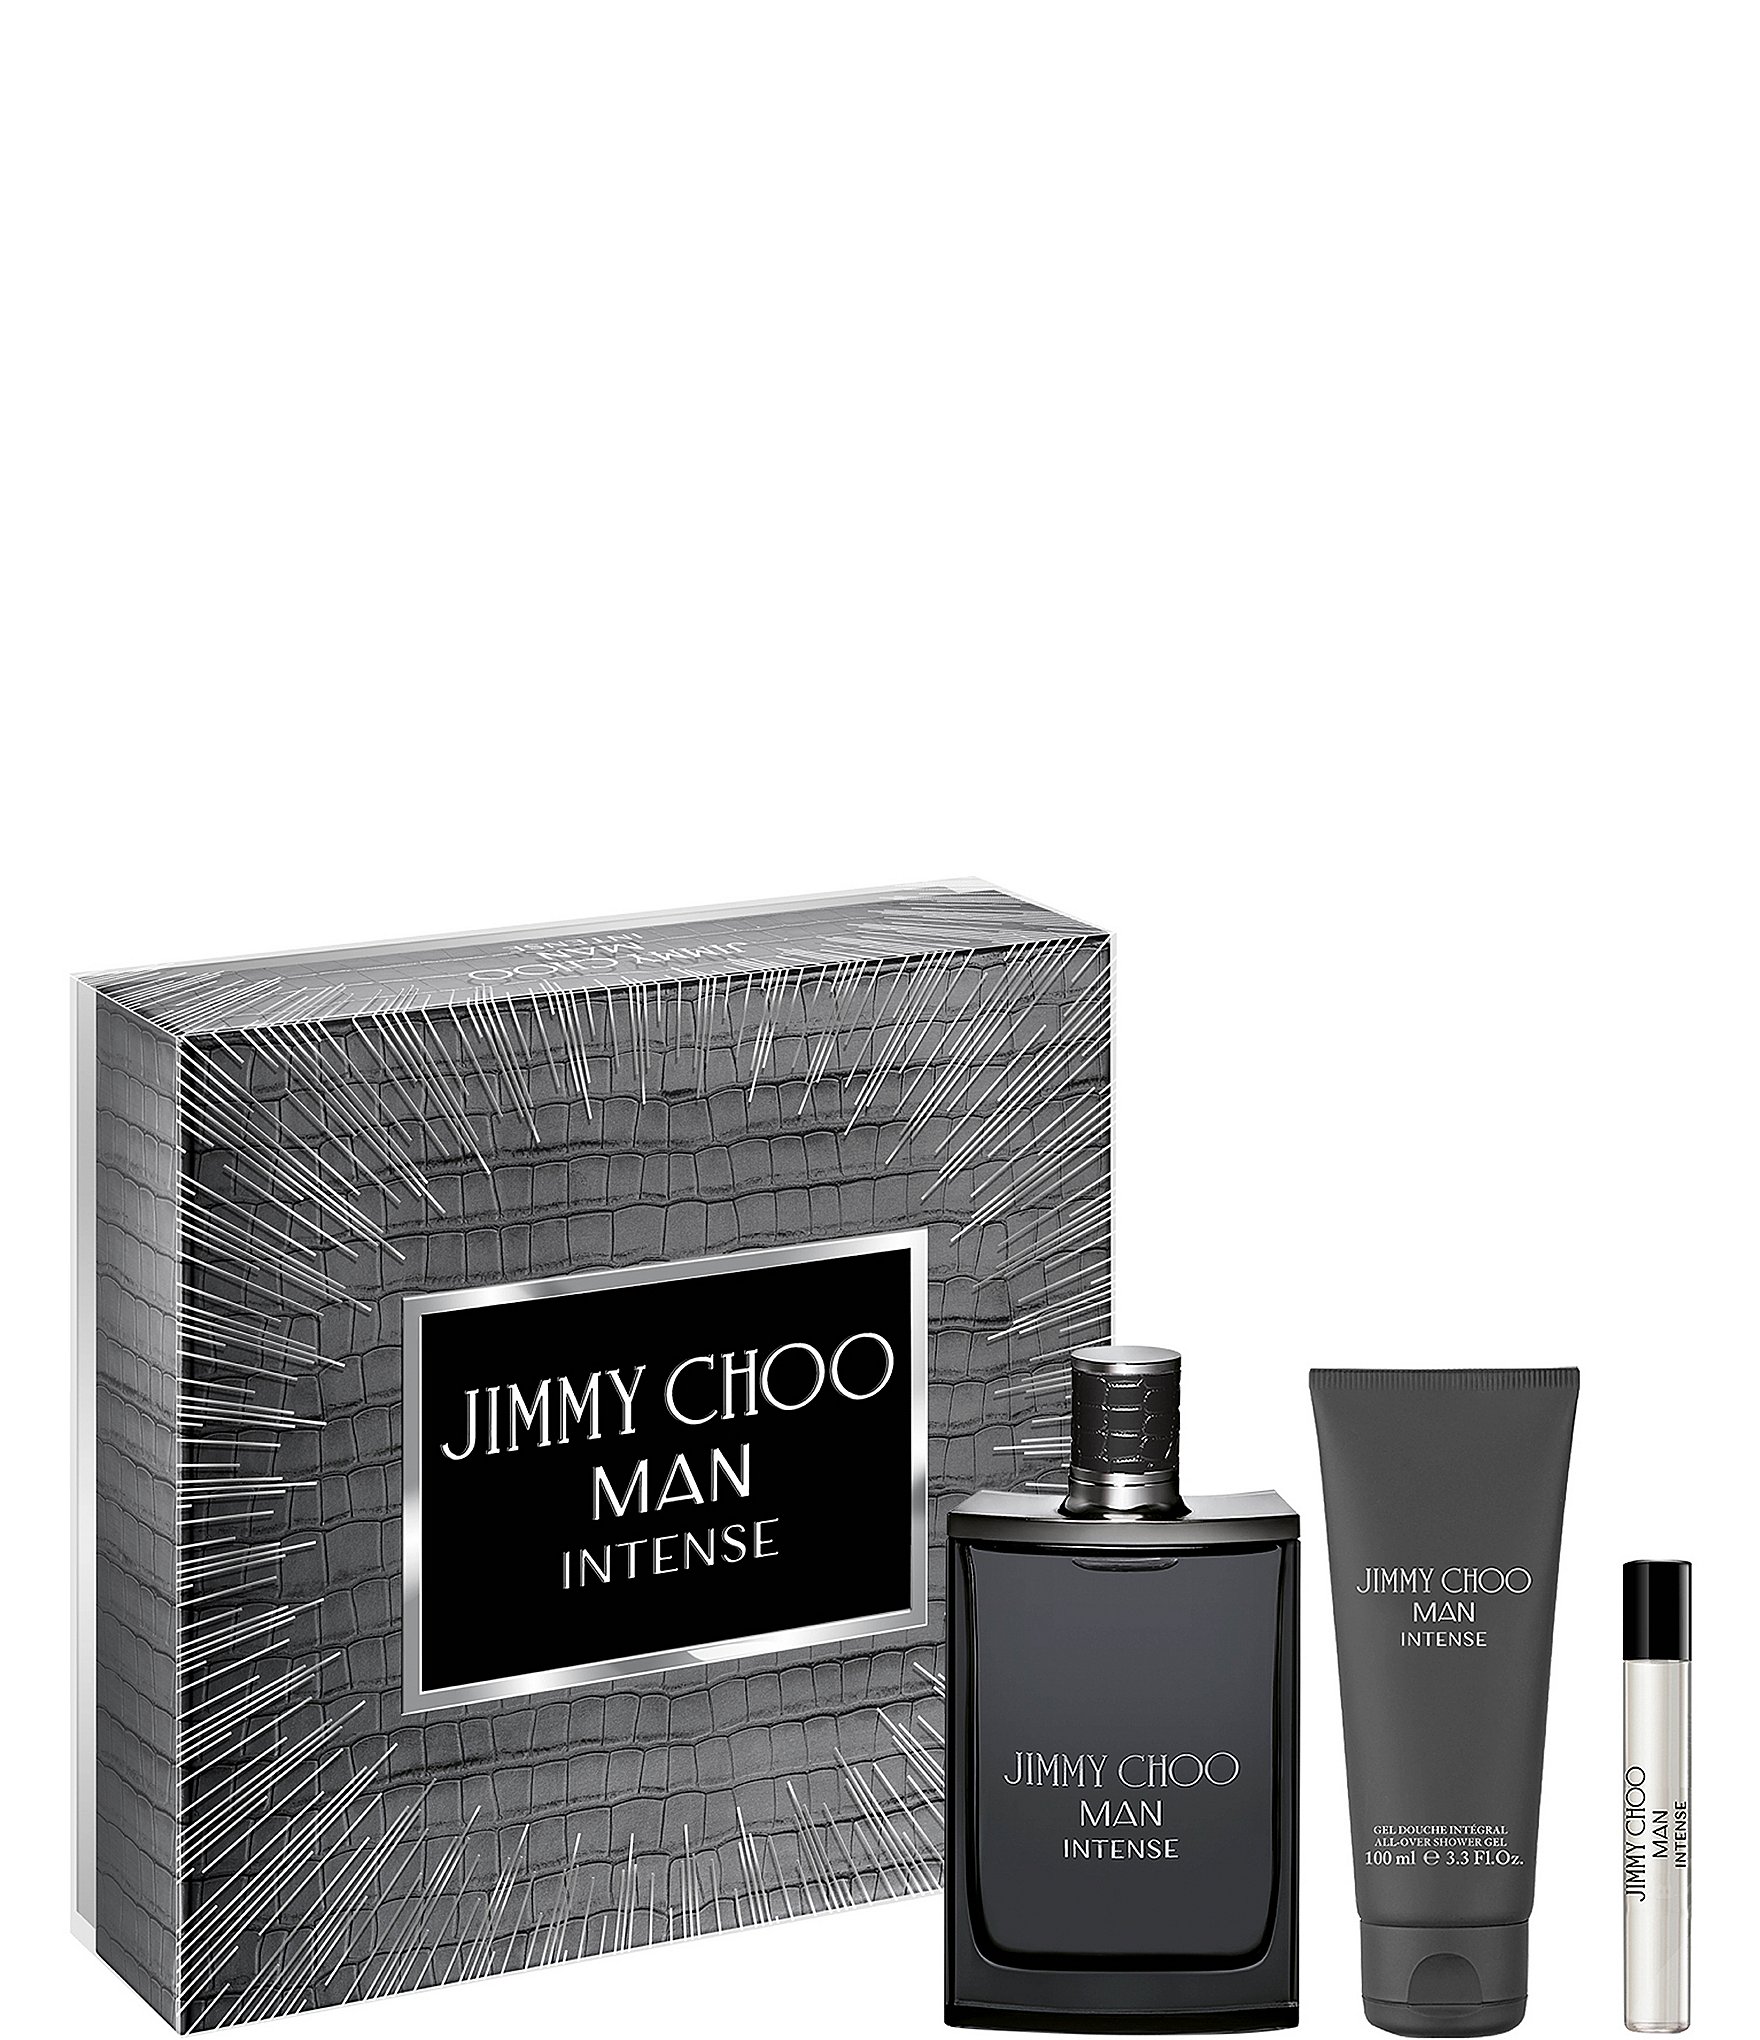 Jimmy Choo Man Cologne/Fragrance Review and Thoughts 